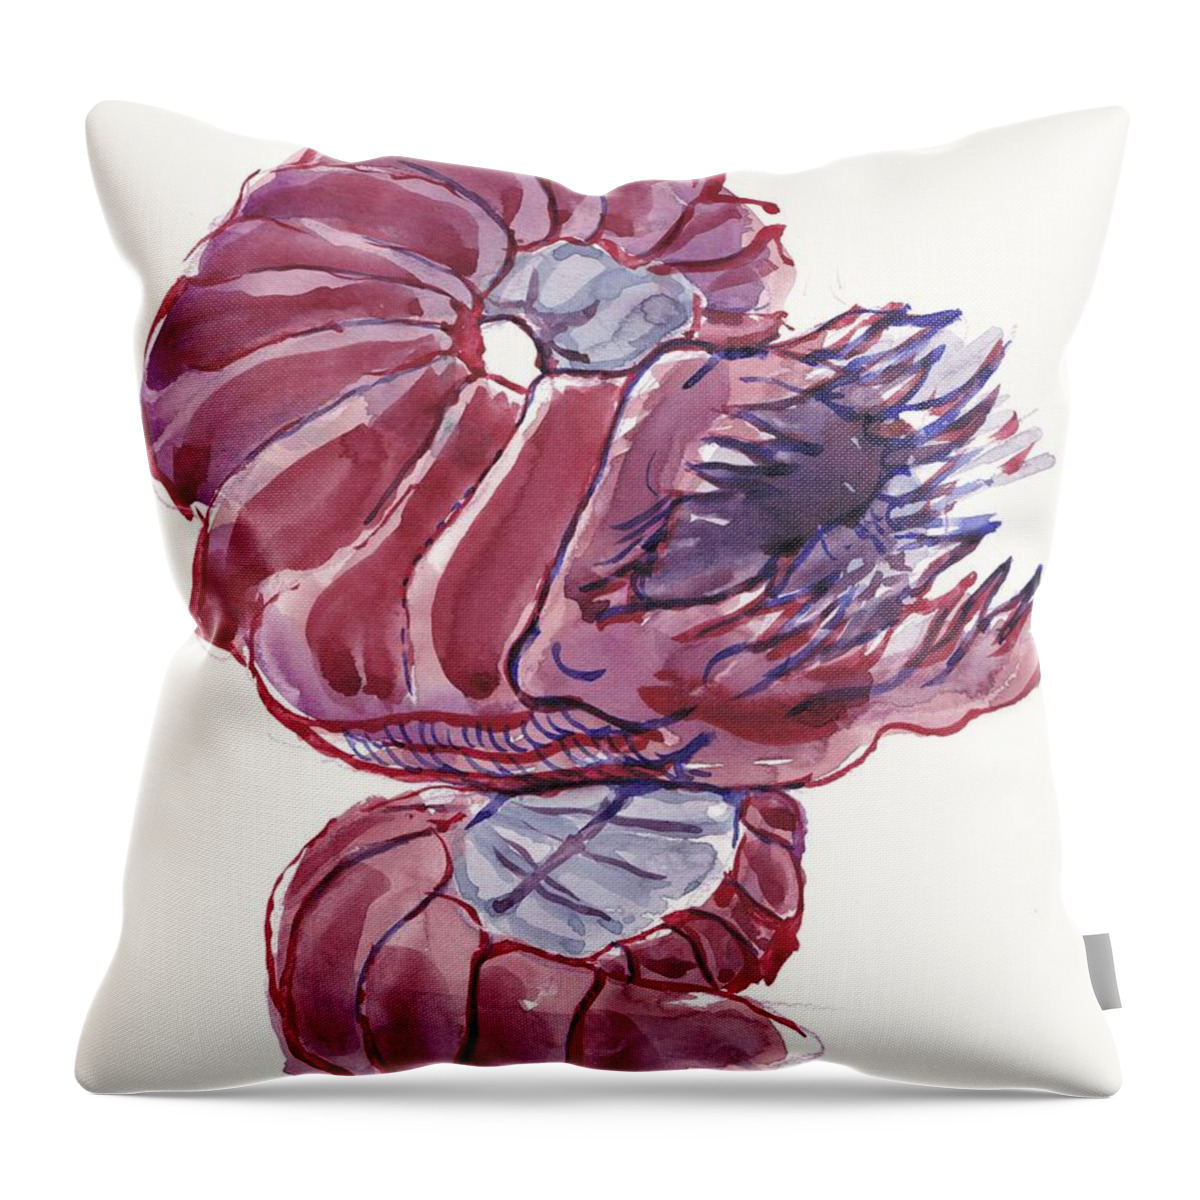 Miniature Throw Pillow featuring the painting Purple Worm by George Cret